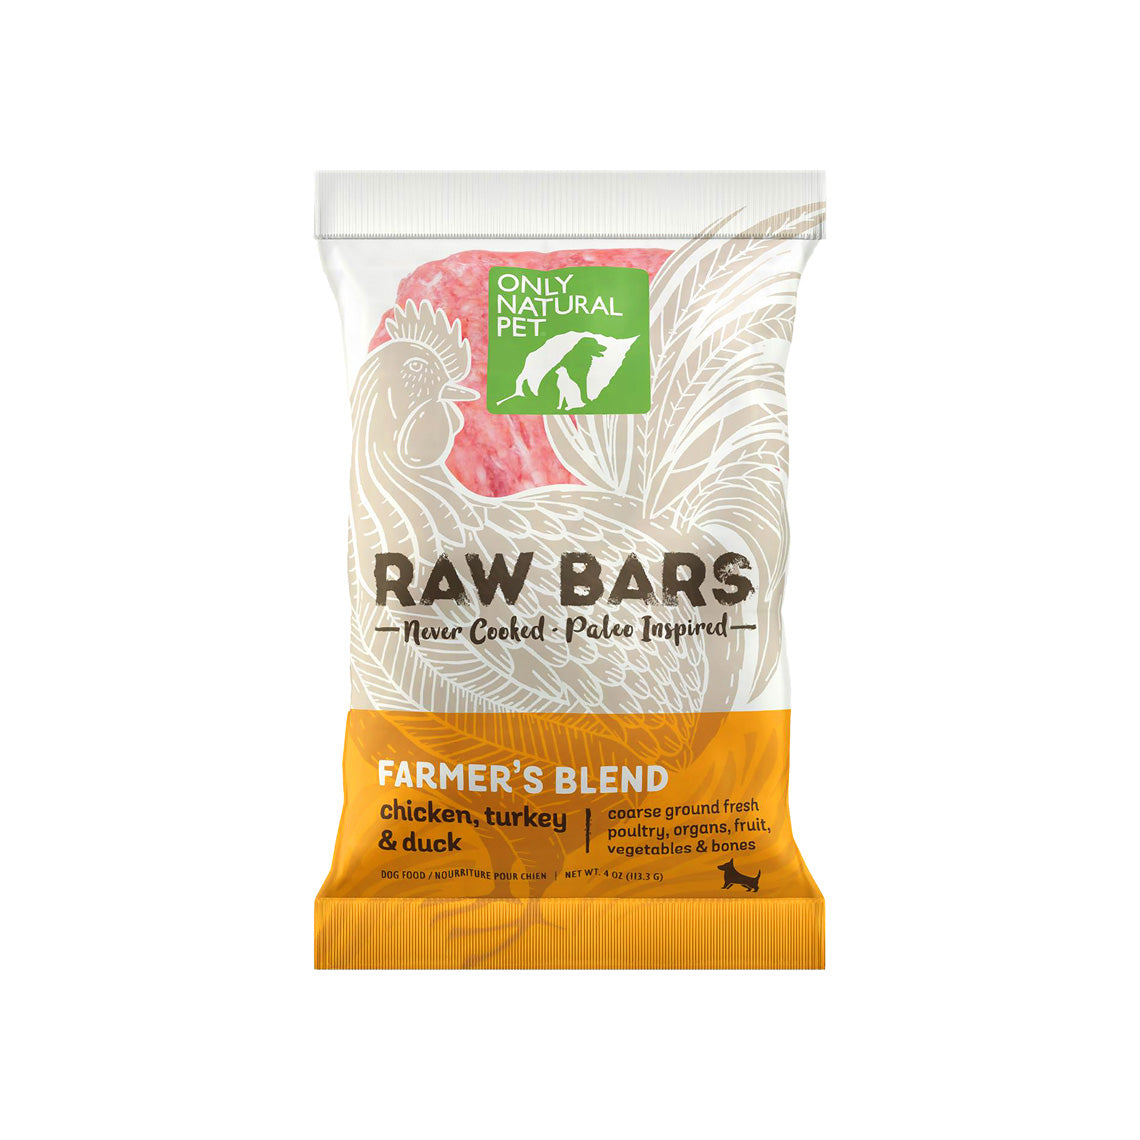 Frozen Raw Bars Dog Food Patties | Only 